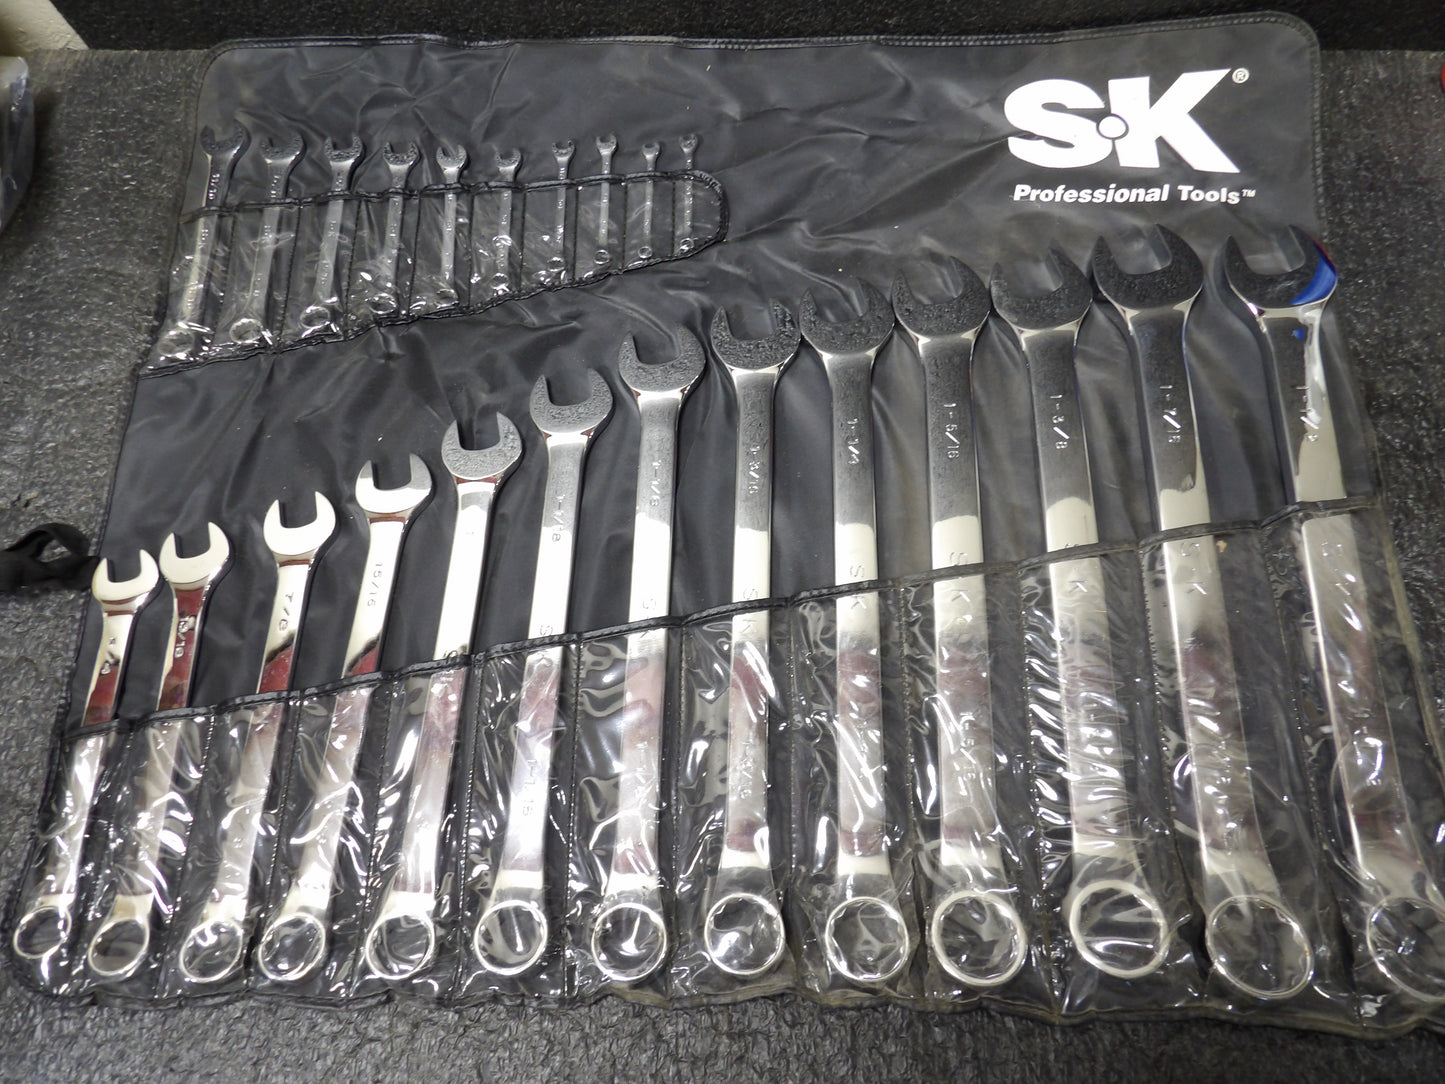 SK PROFESSIONAL TOOLS Combination Wrench Set: Alloy Steel, Chrome, 23 Tools, 15° Head Offset Angle, 86043 (CR00807-WTA23)